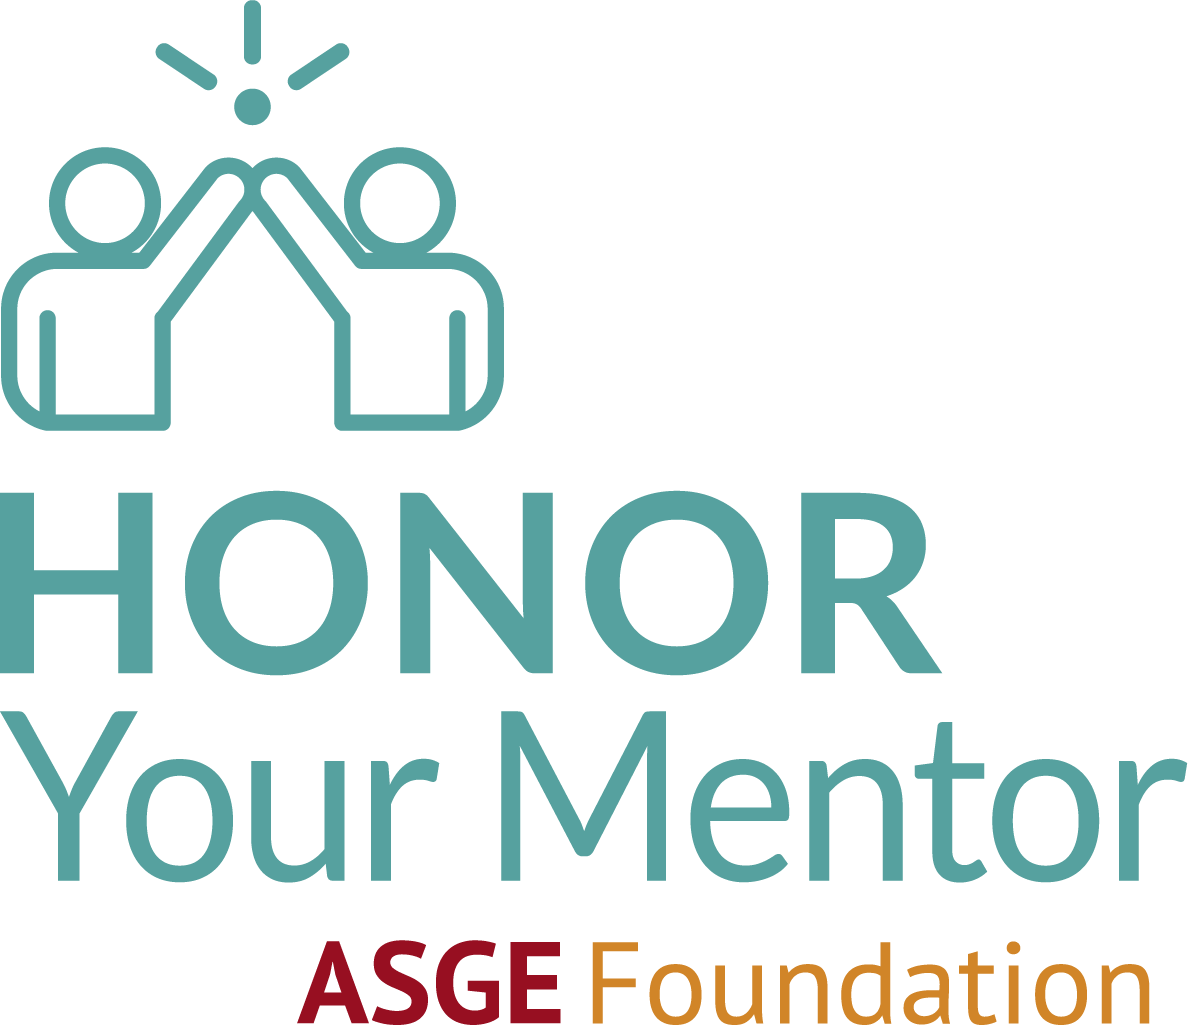 Honor Your Mentor ASGE Foundation